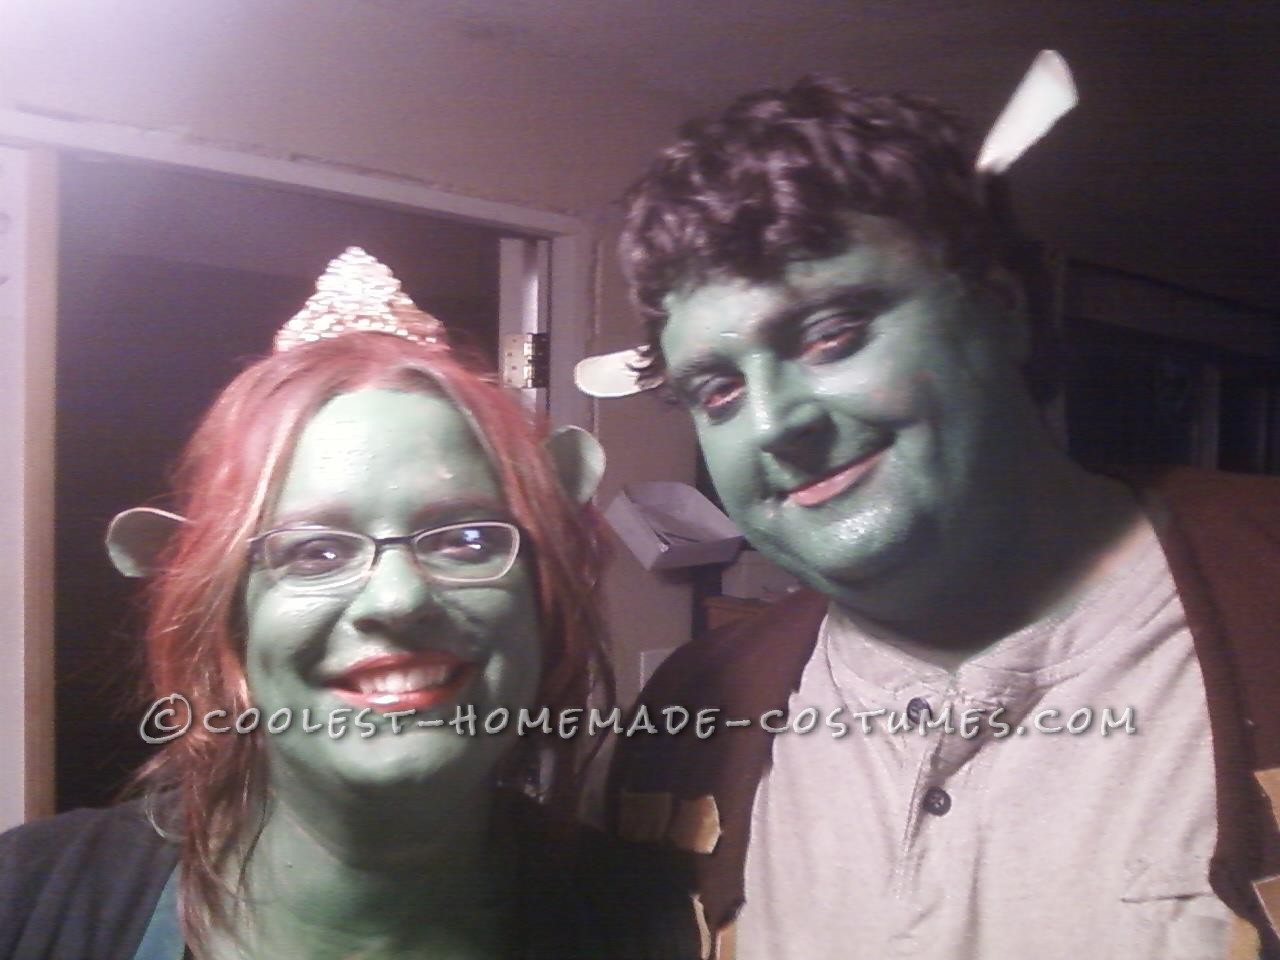 I thought long and hard about what to be for halloween. Shrek and Fiona was perfect for my husband and i for swe are shaped alot like the characters.